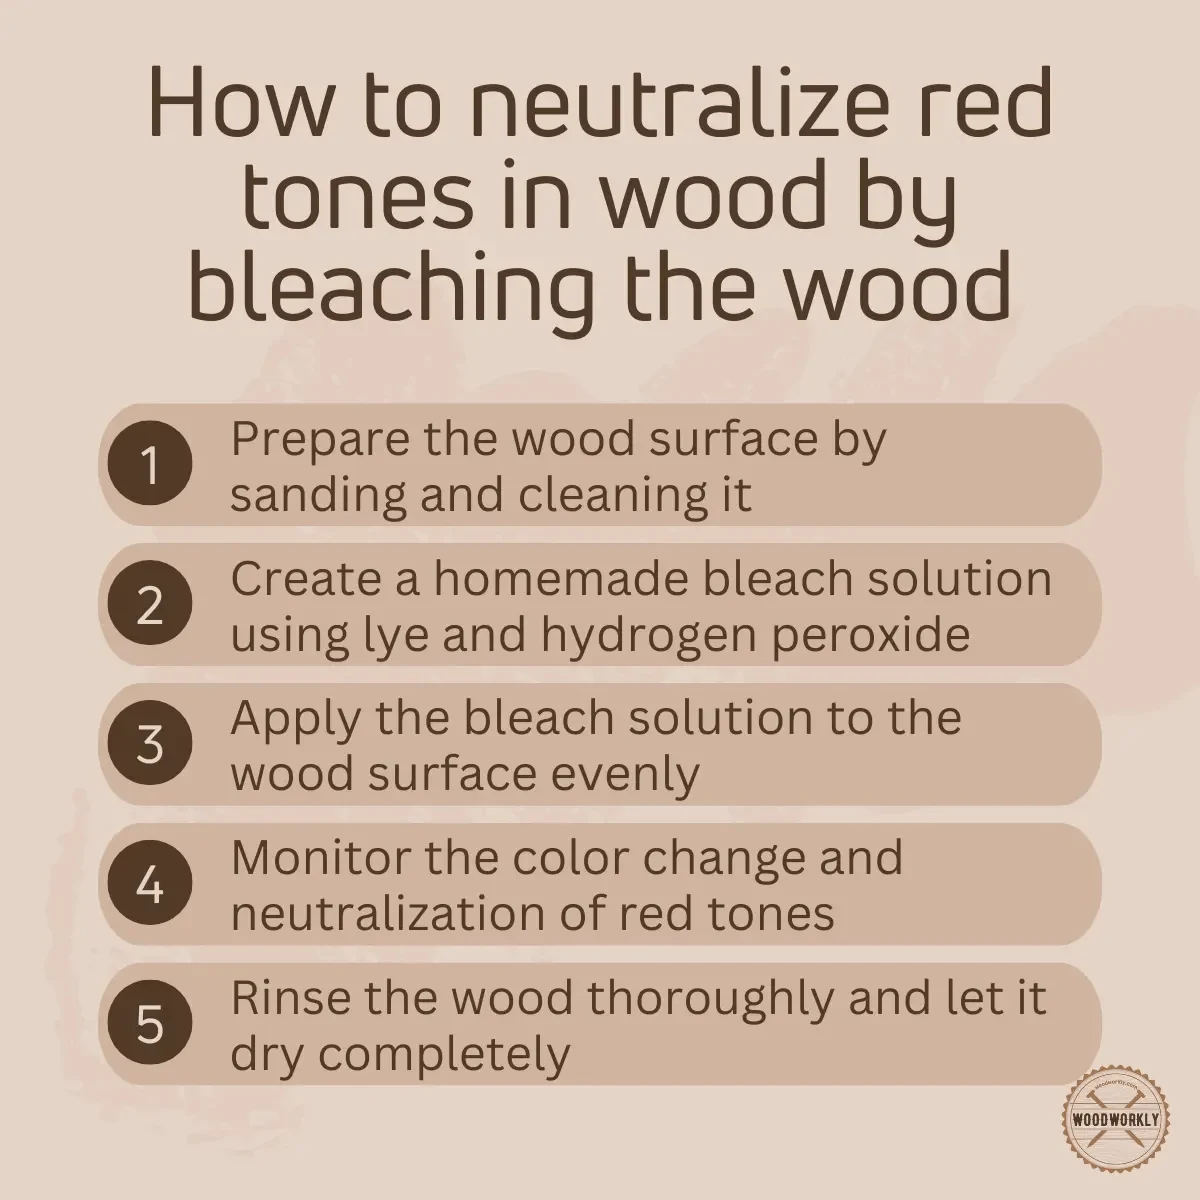 how to neutralize red tones in wood by bleaching the wood